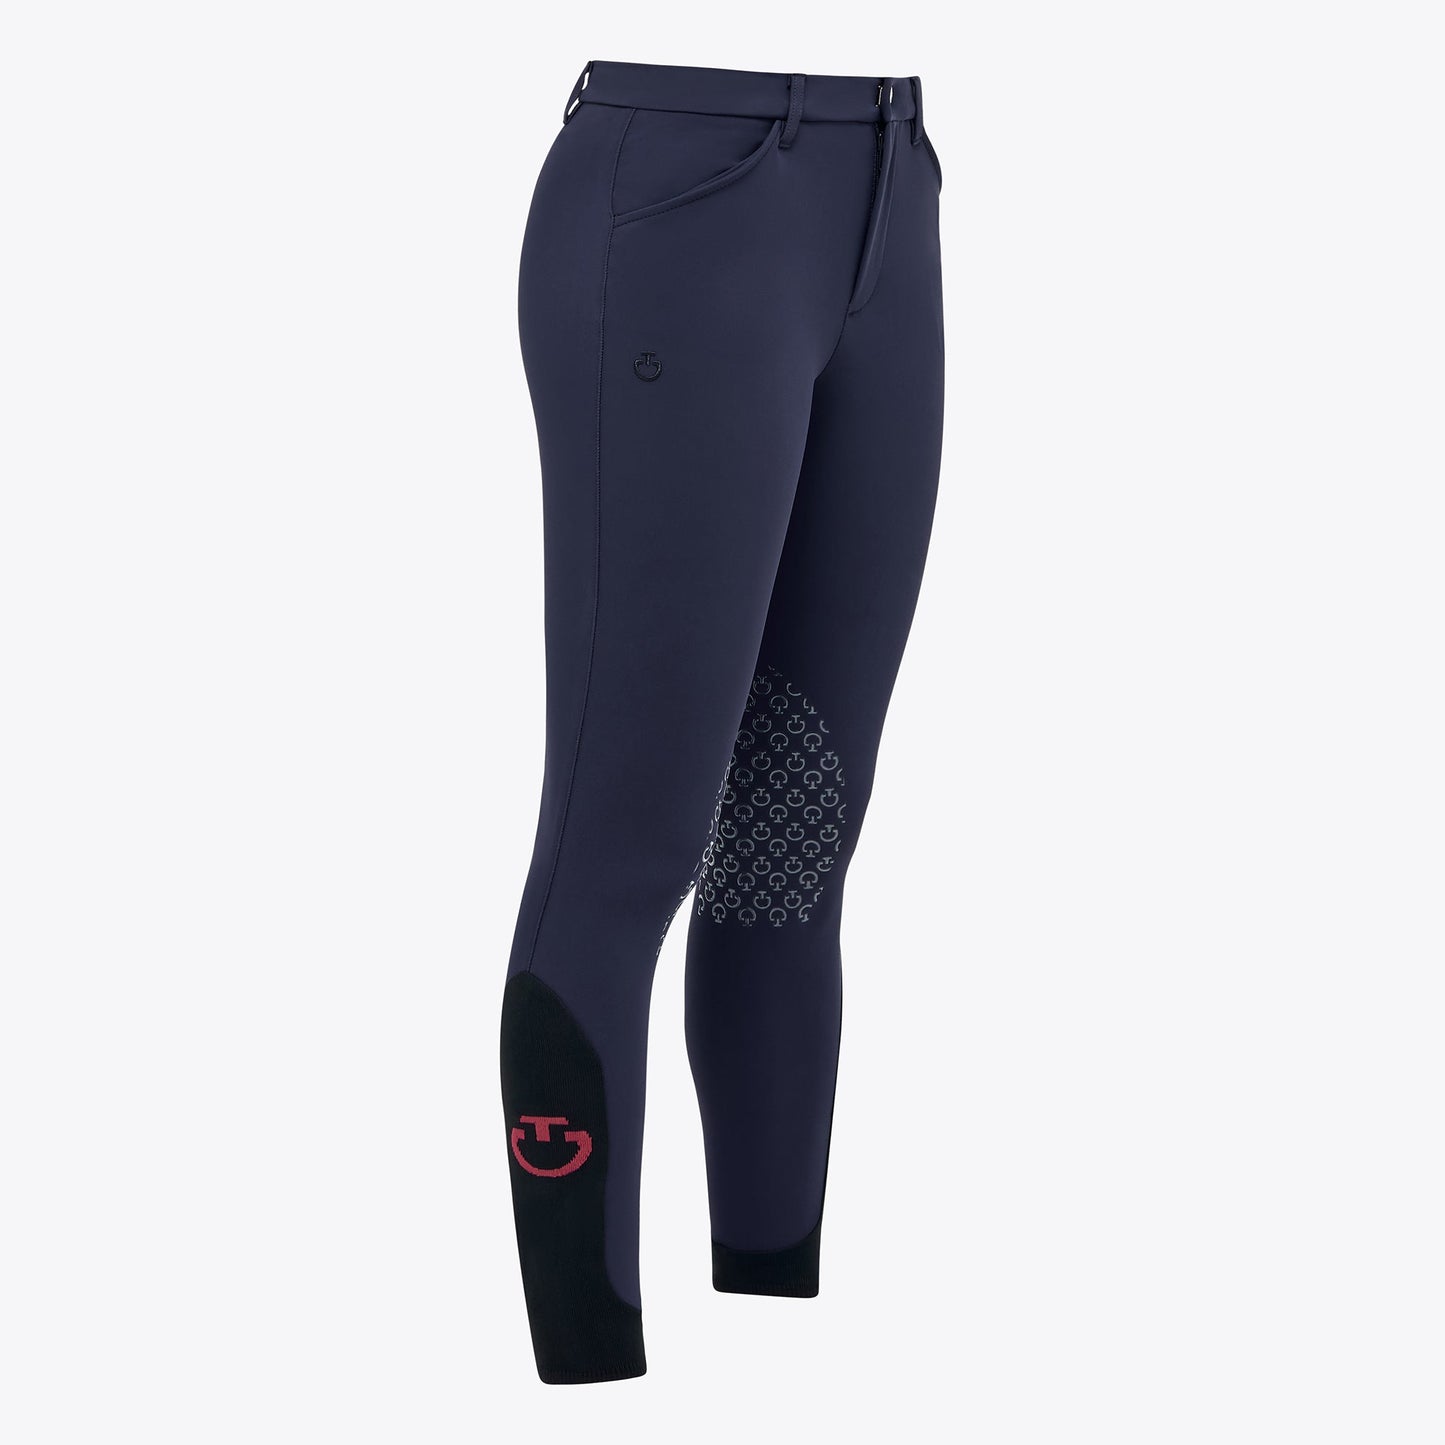 Cavalleria Toscana Young Rider CT logo Grip Breeches-Trailrace Equestrian Outfitters-The Equestrian